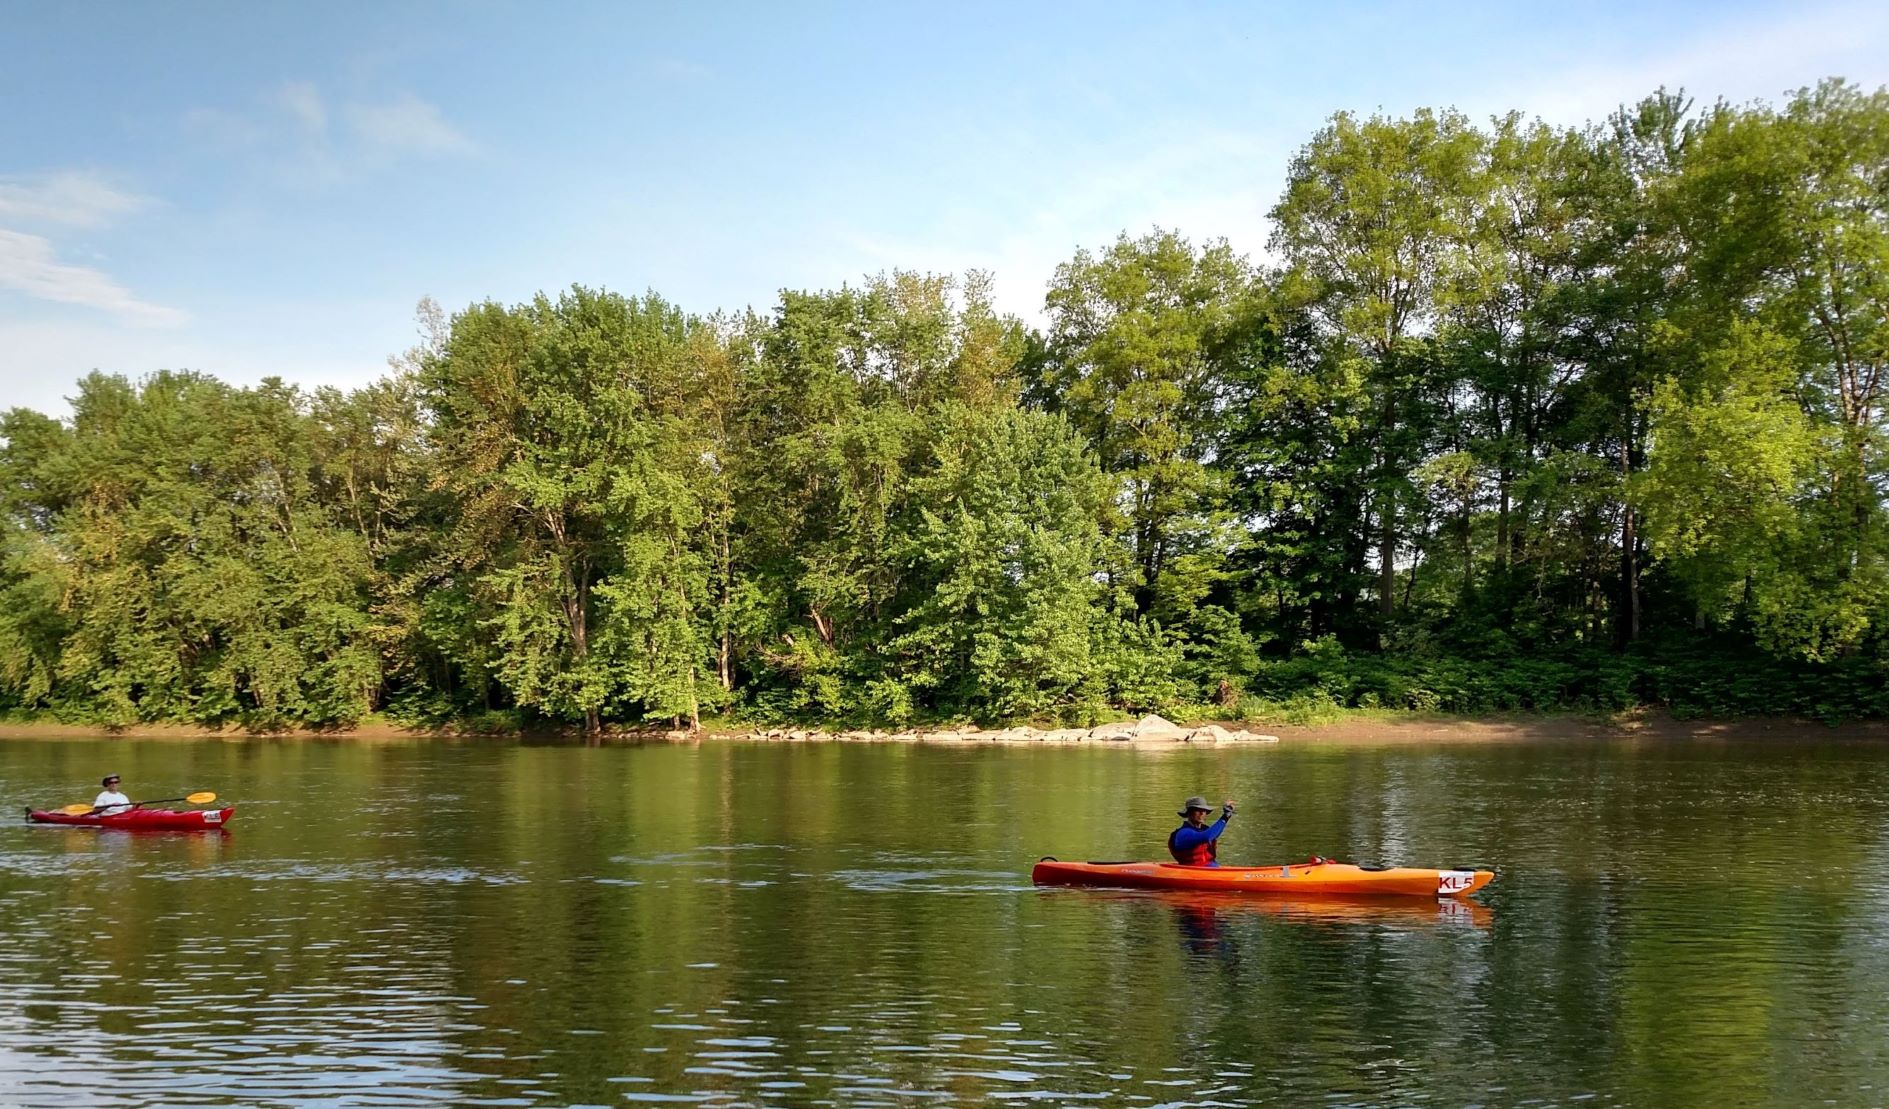 Two kayakers paddling on the Susquehanna River, trees in background